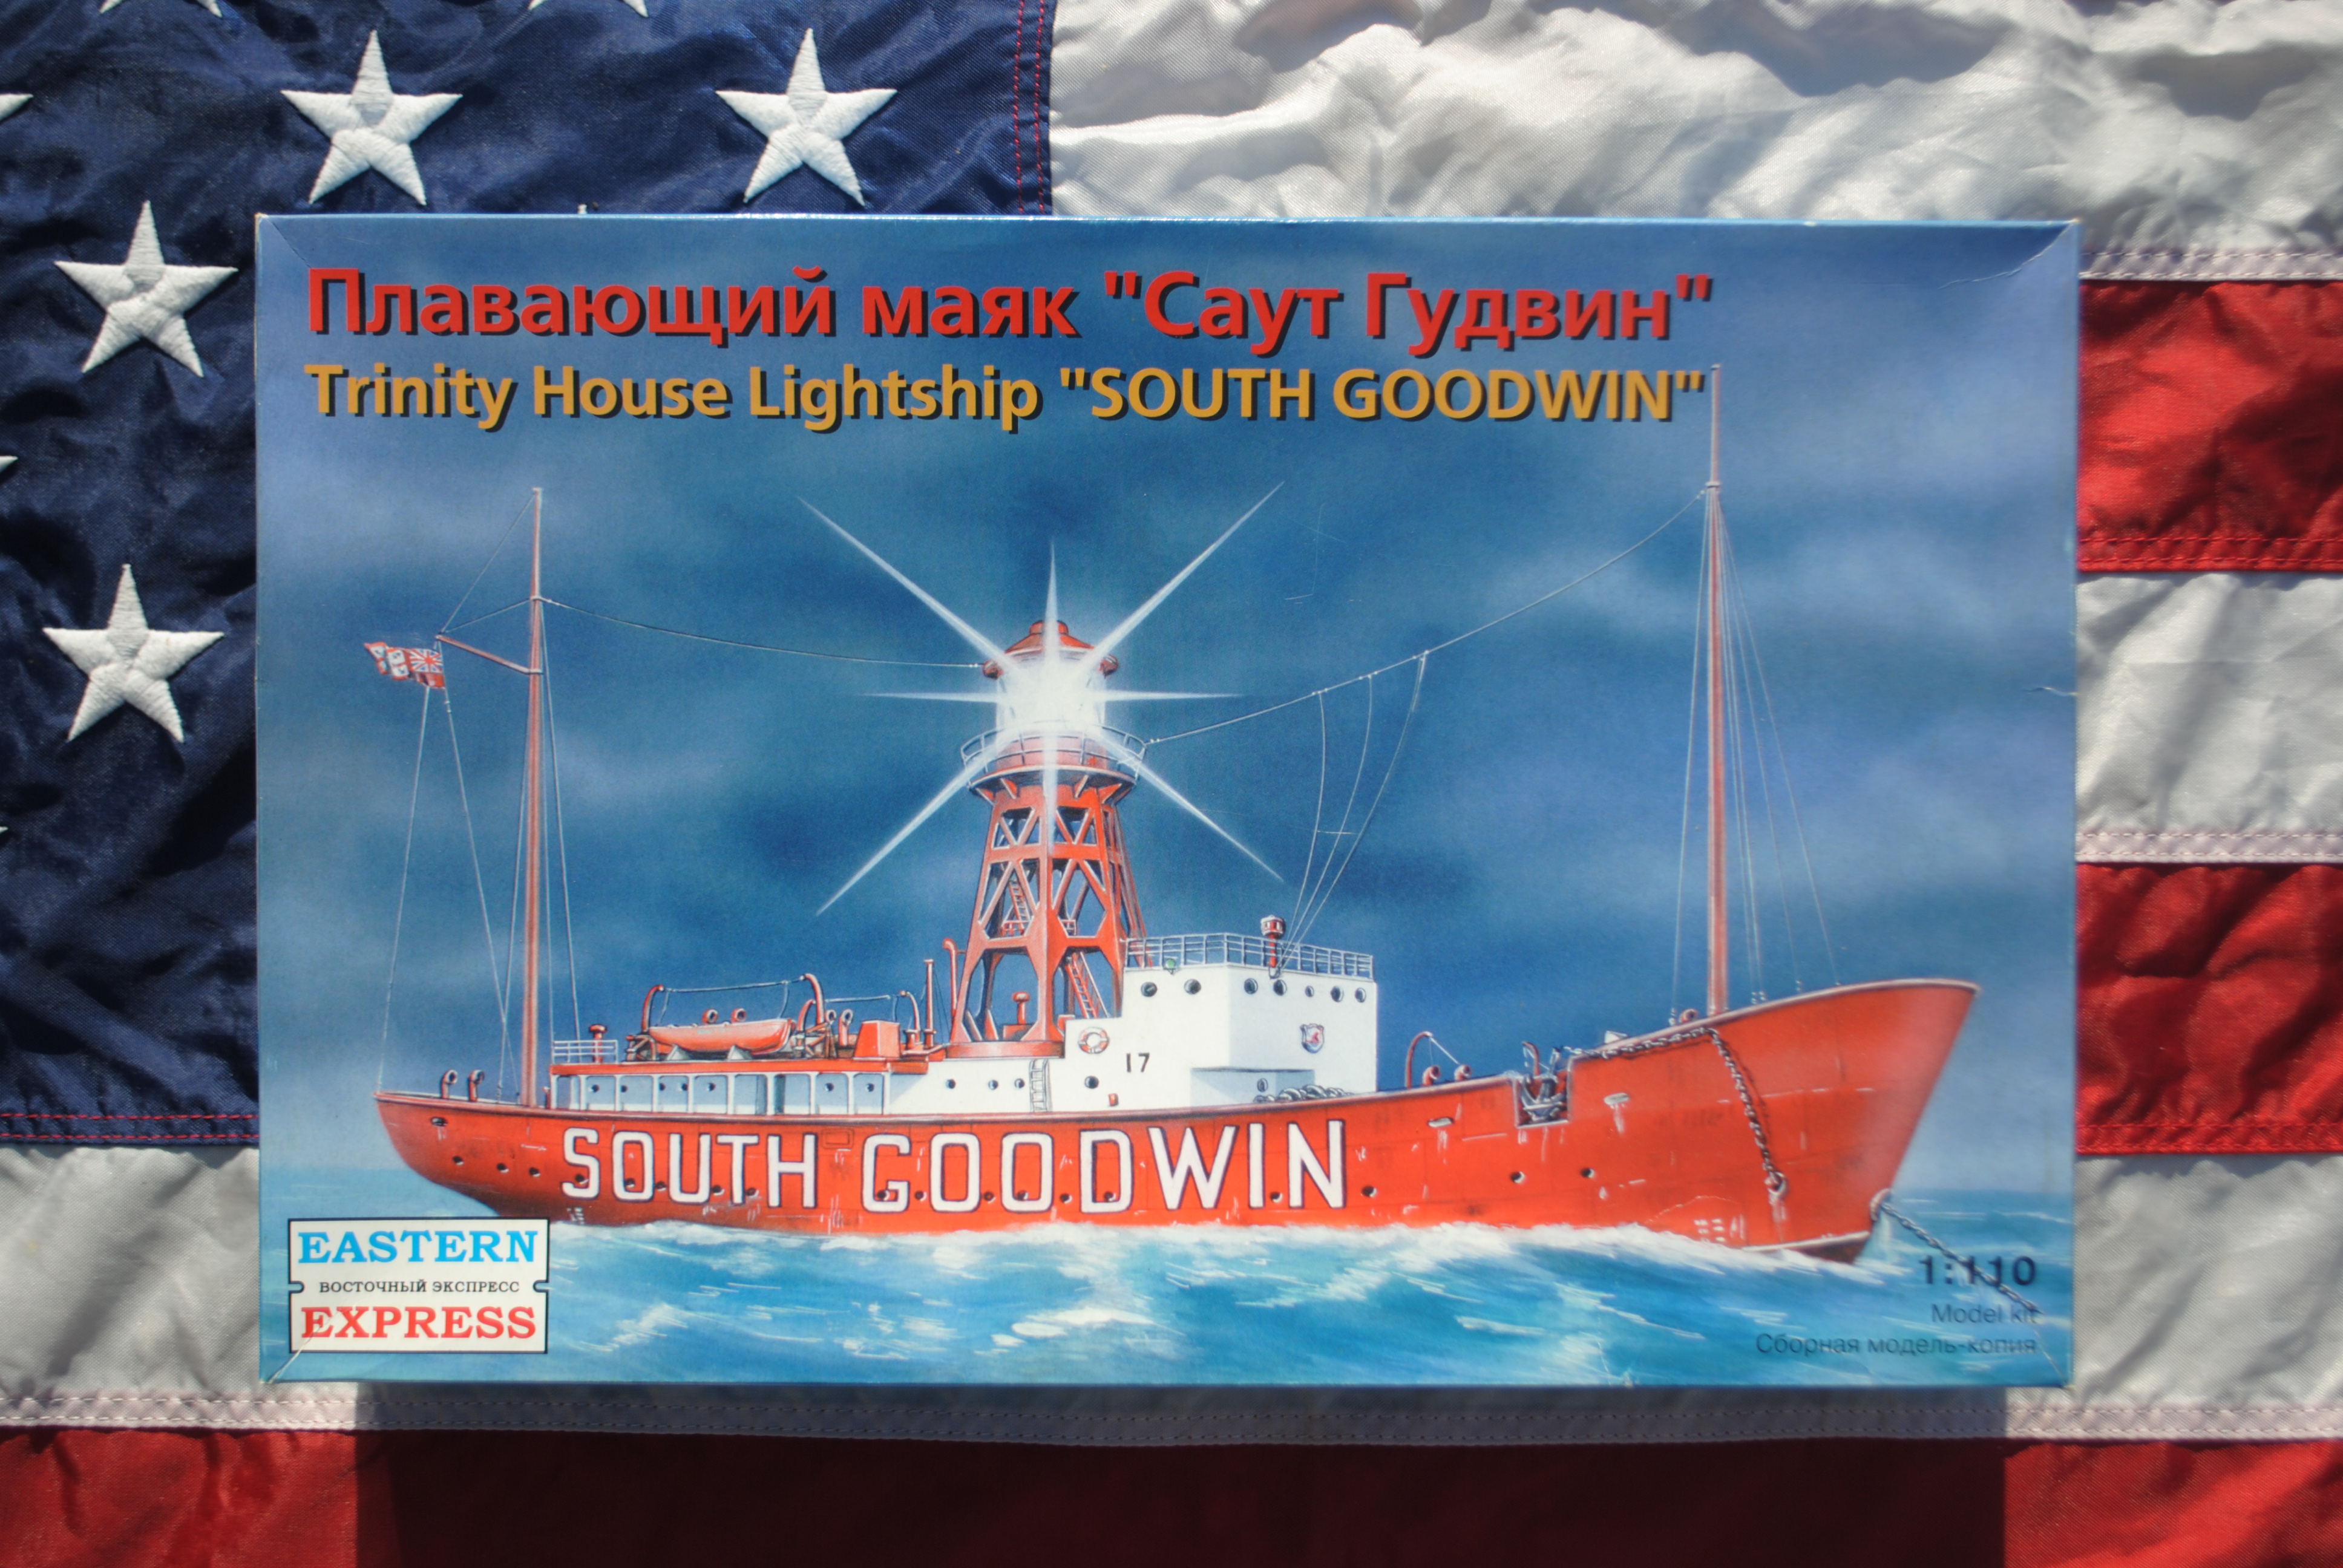 Eastern Express 40003 Trinity House Lightship South Goodwin 1/110 ex-FROG Kit 